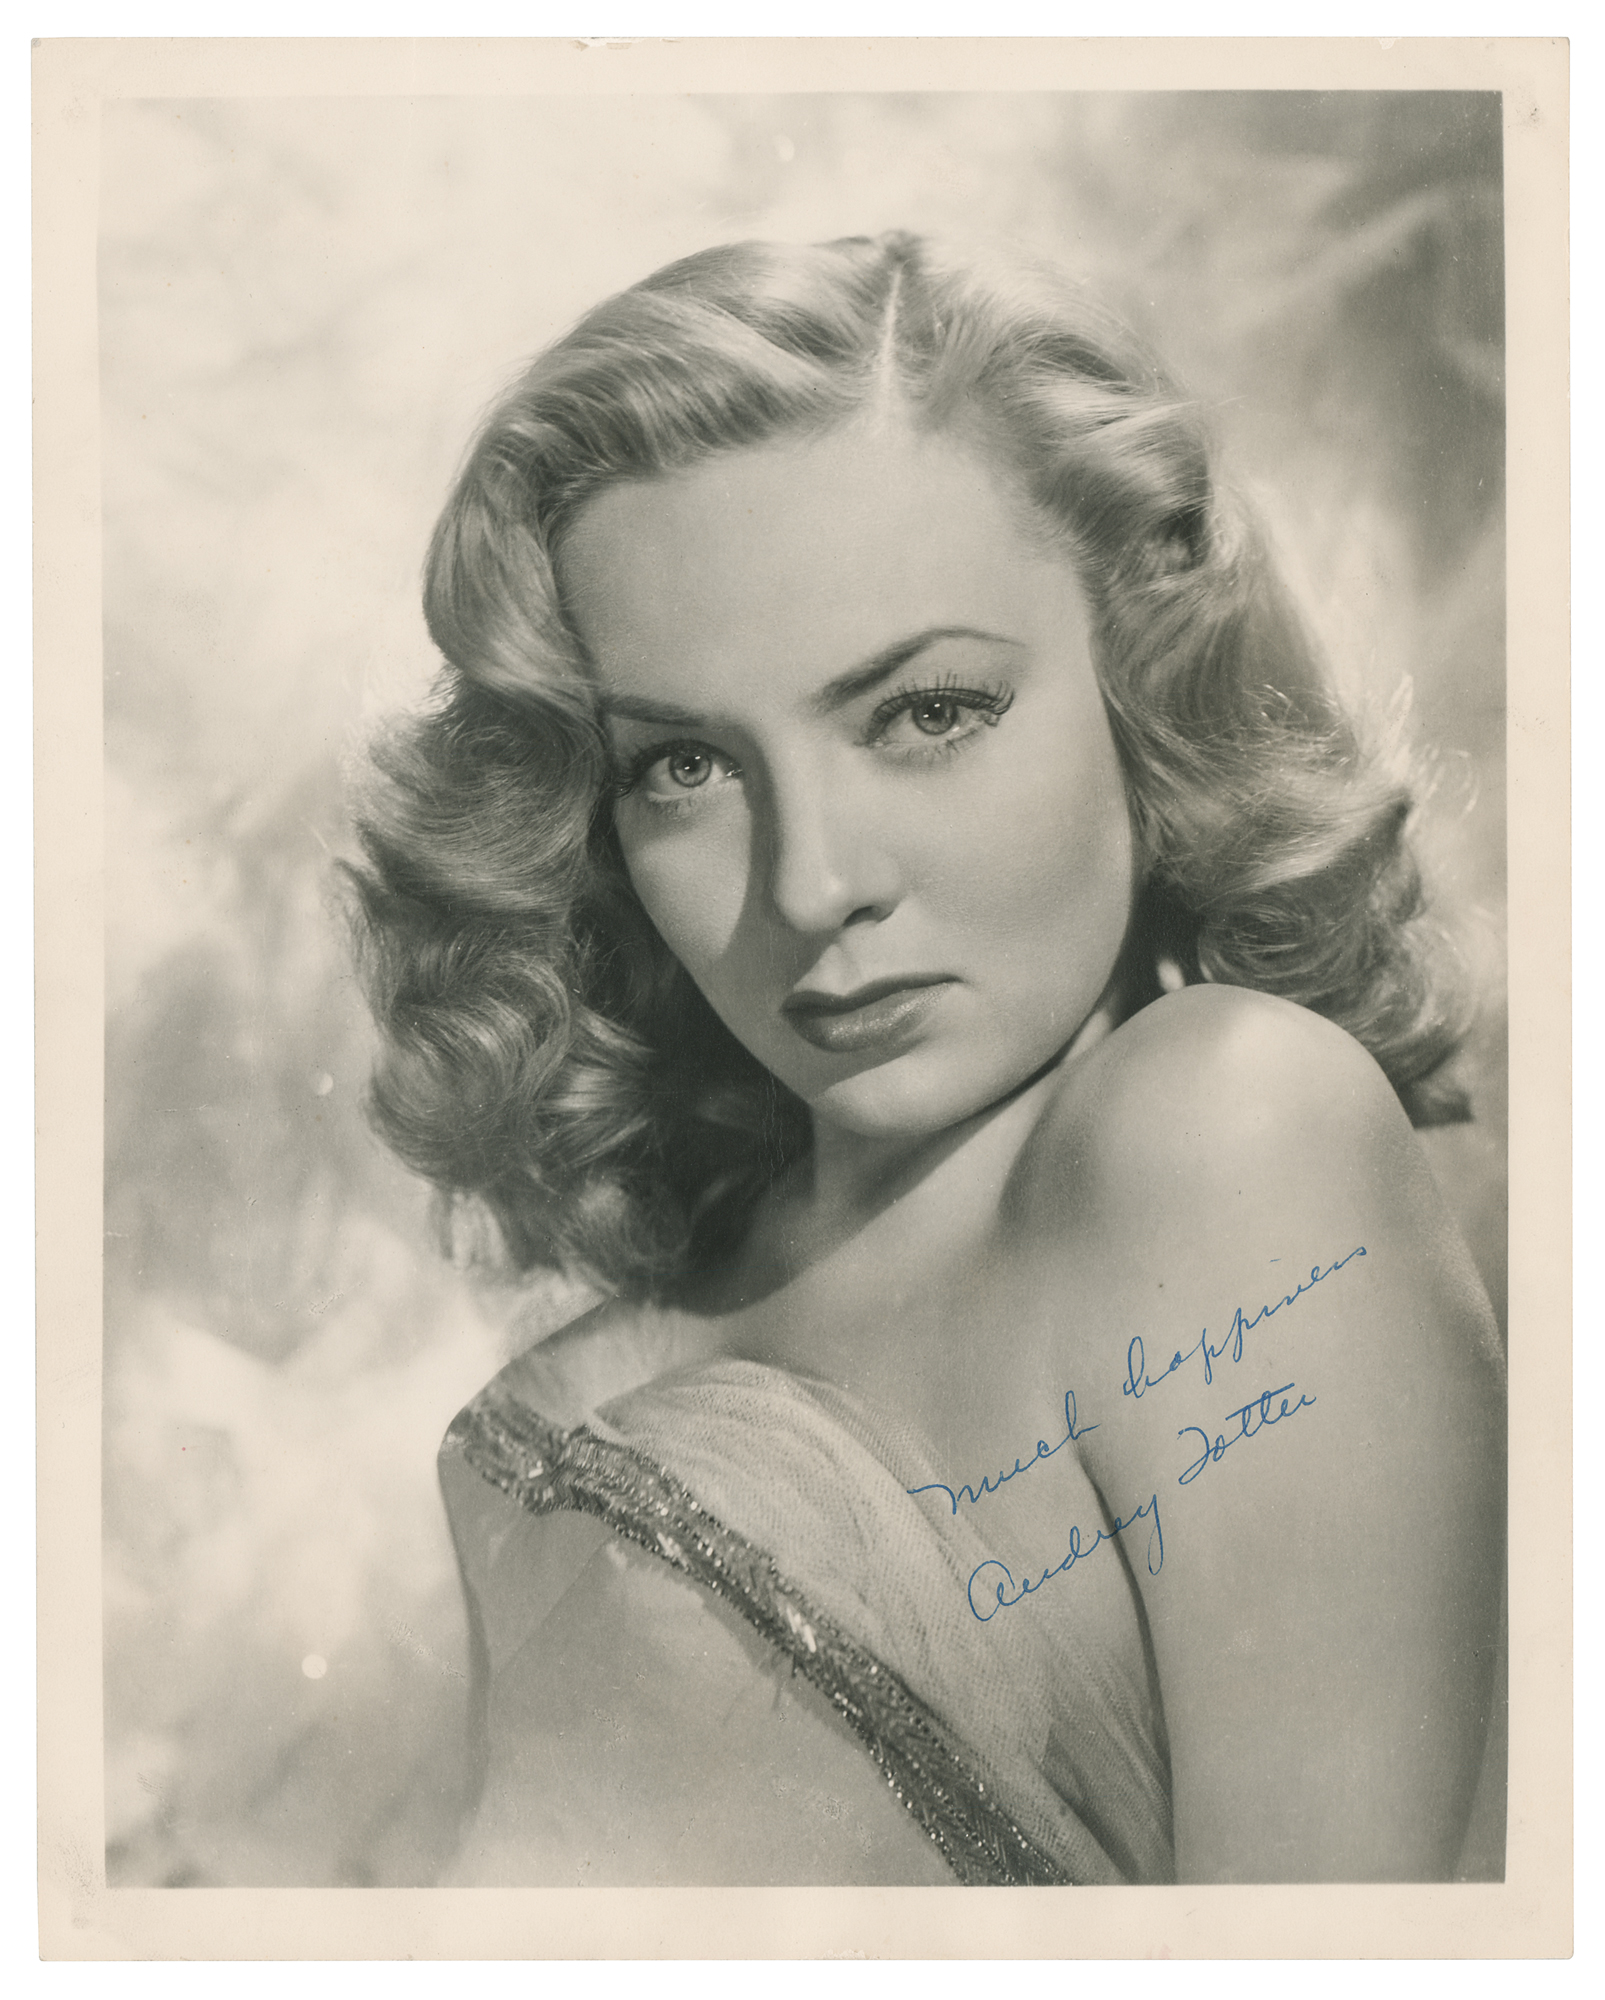 Lot #5400 Audrey Totter Signed Photograph - Image 1